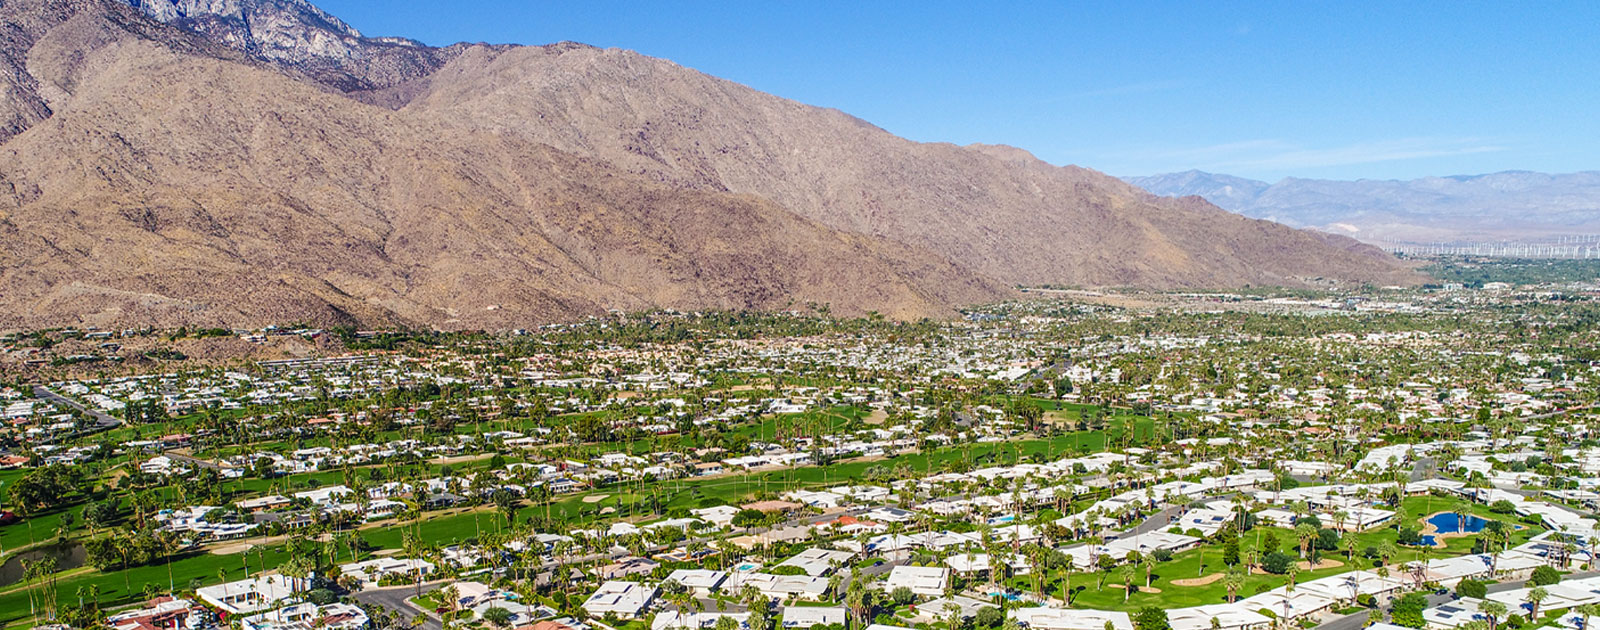 Panoramic view of housing in the Coachella Valley